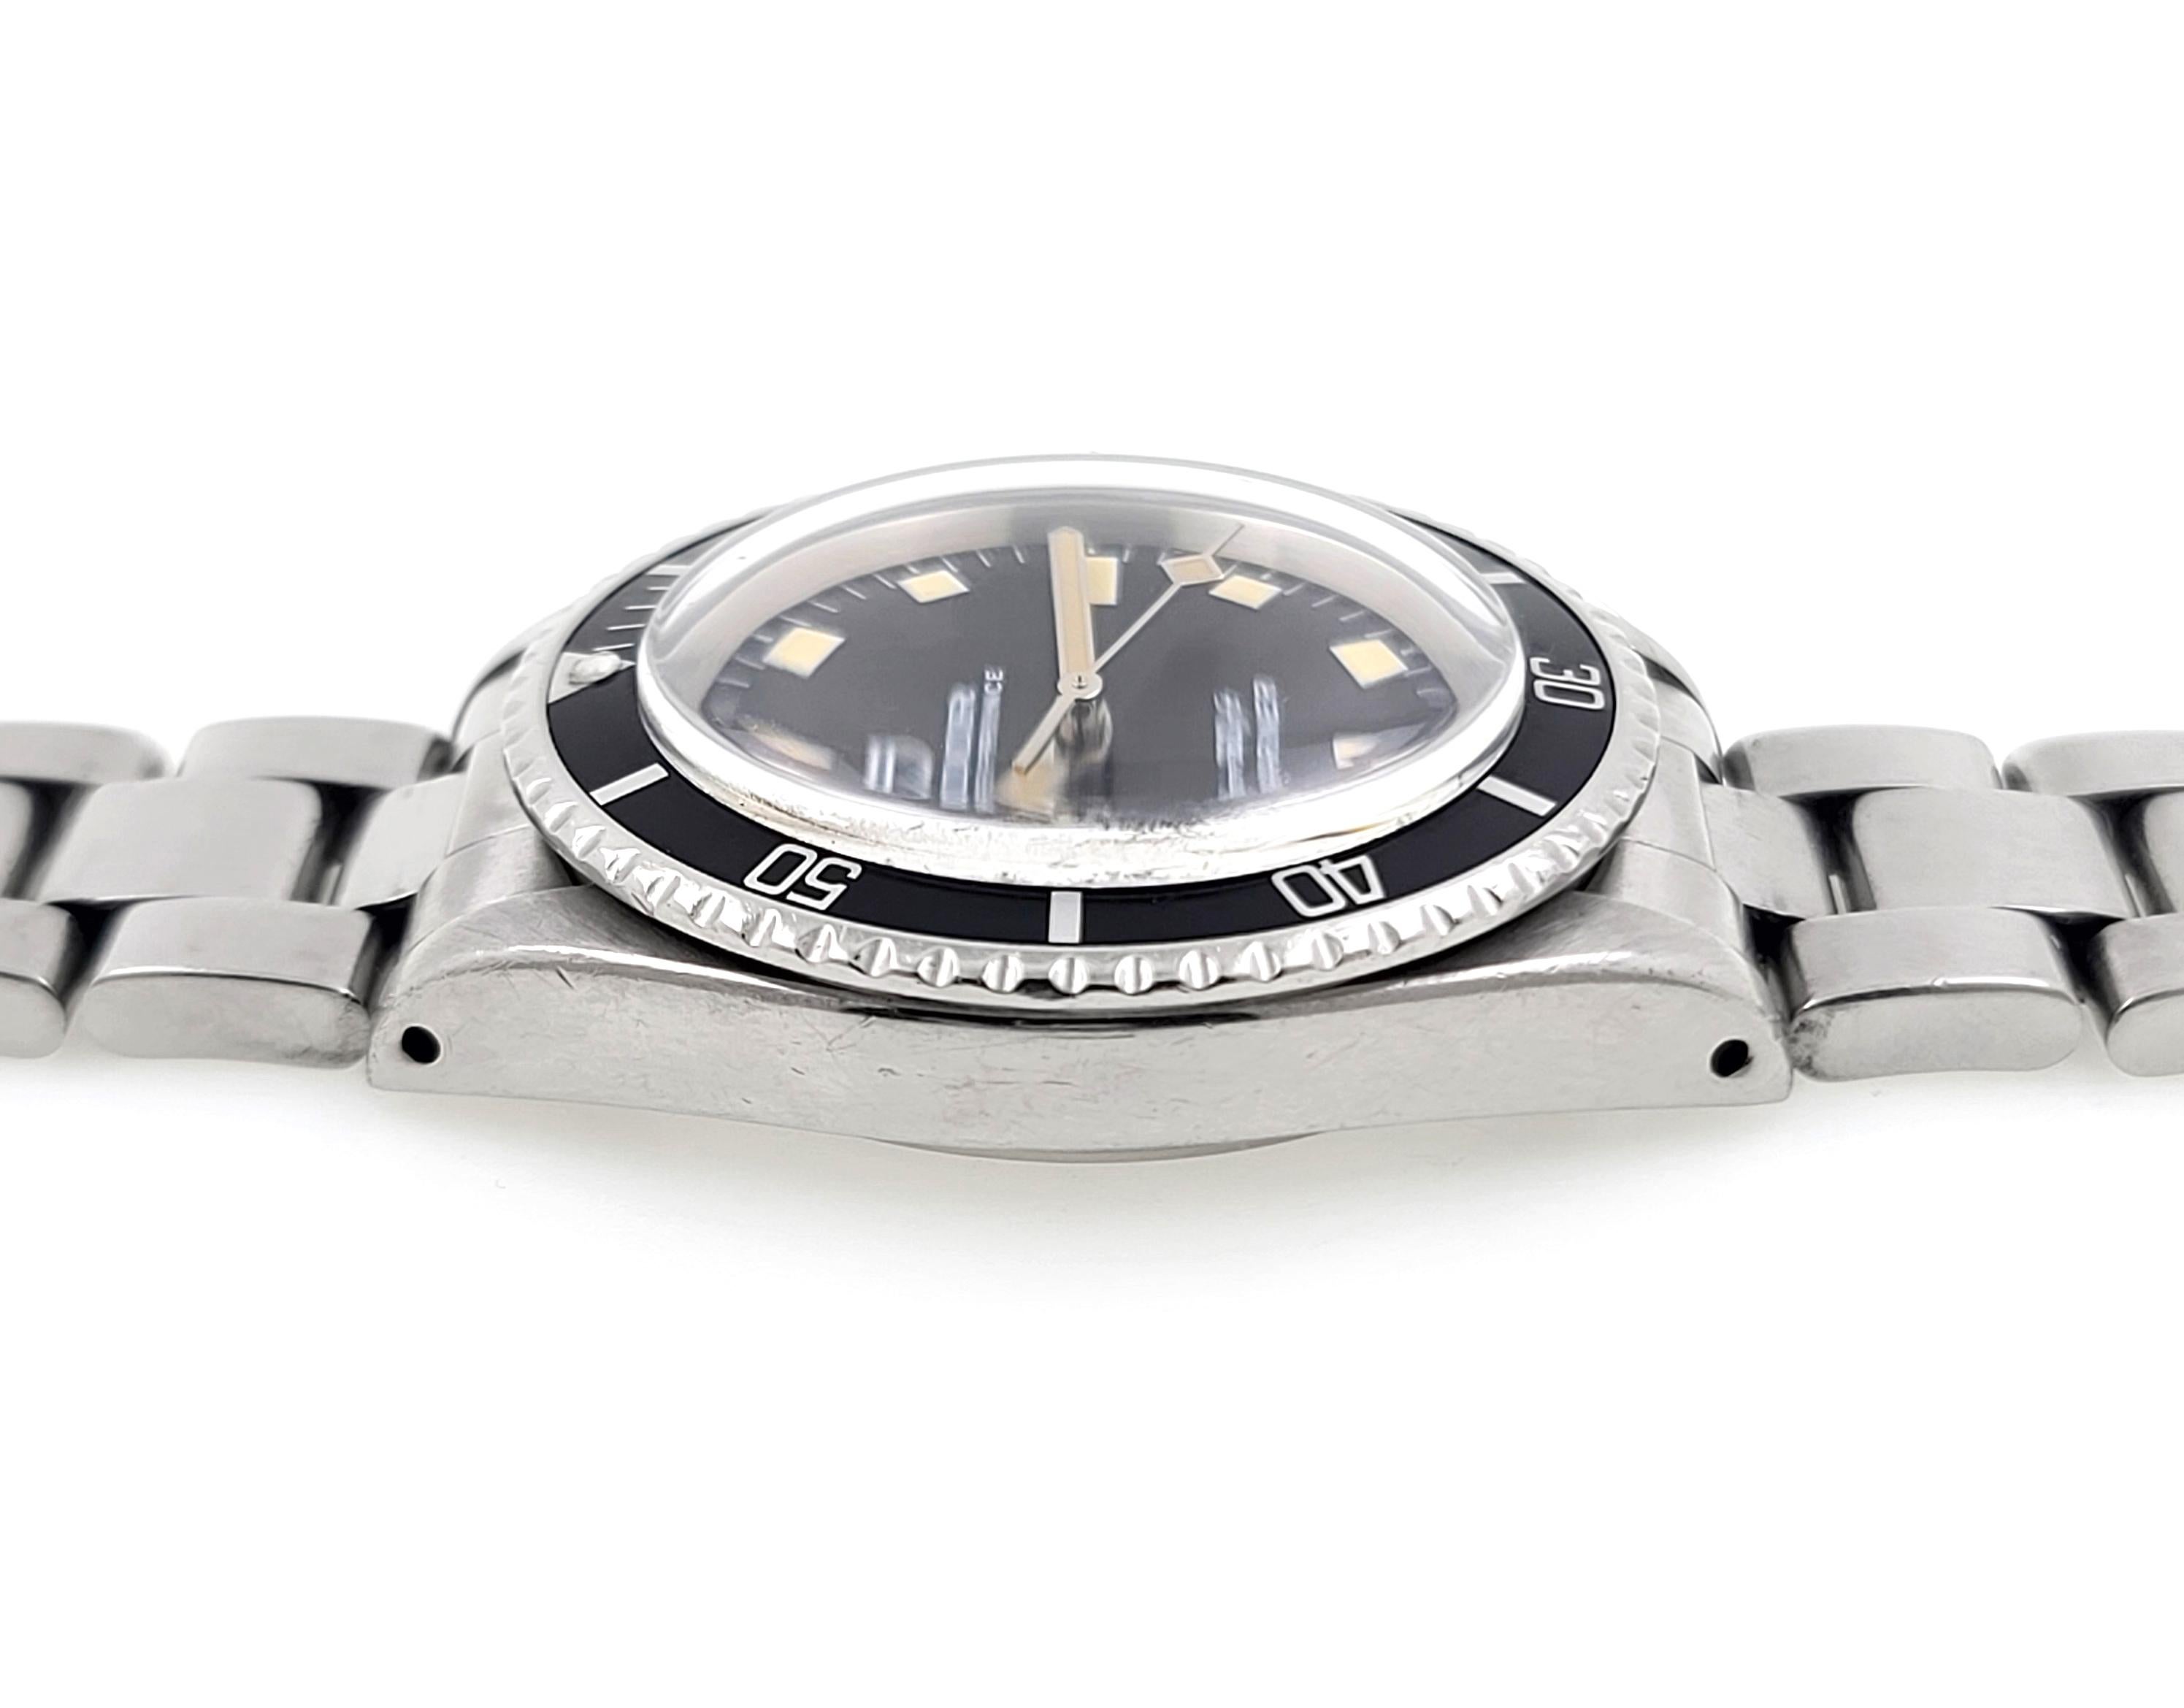 Tudor Submariner Snowflake Meter First 7016 Oyster Prince 1971 Marine Nationale For Sale 1